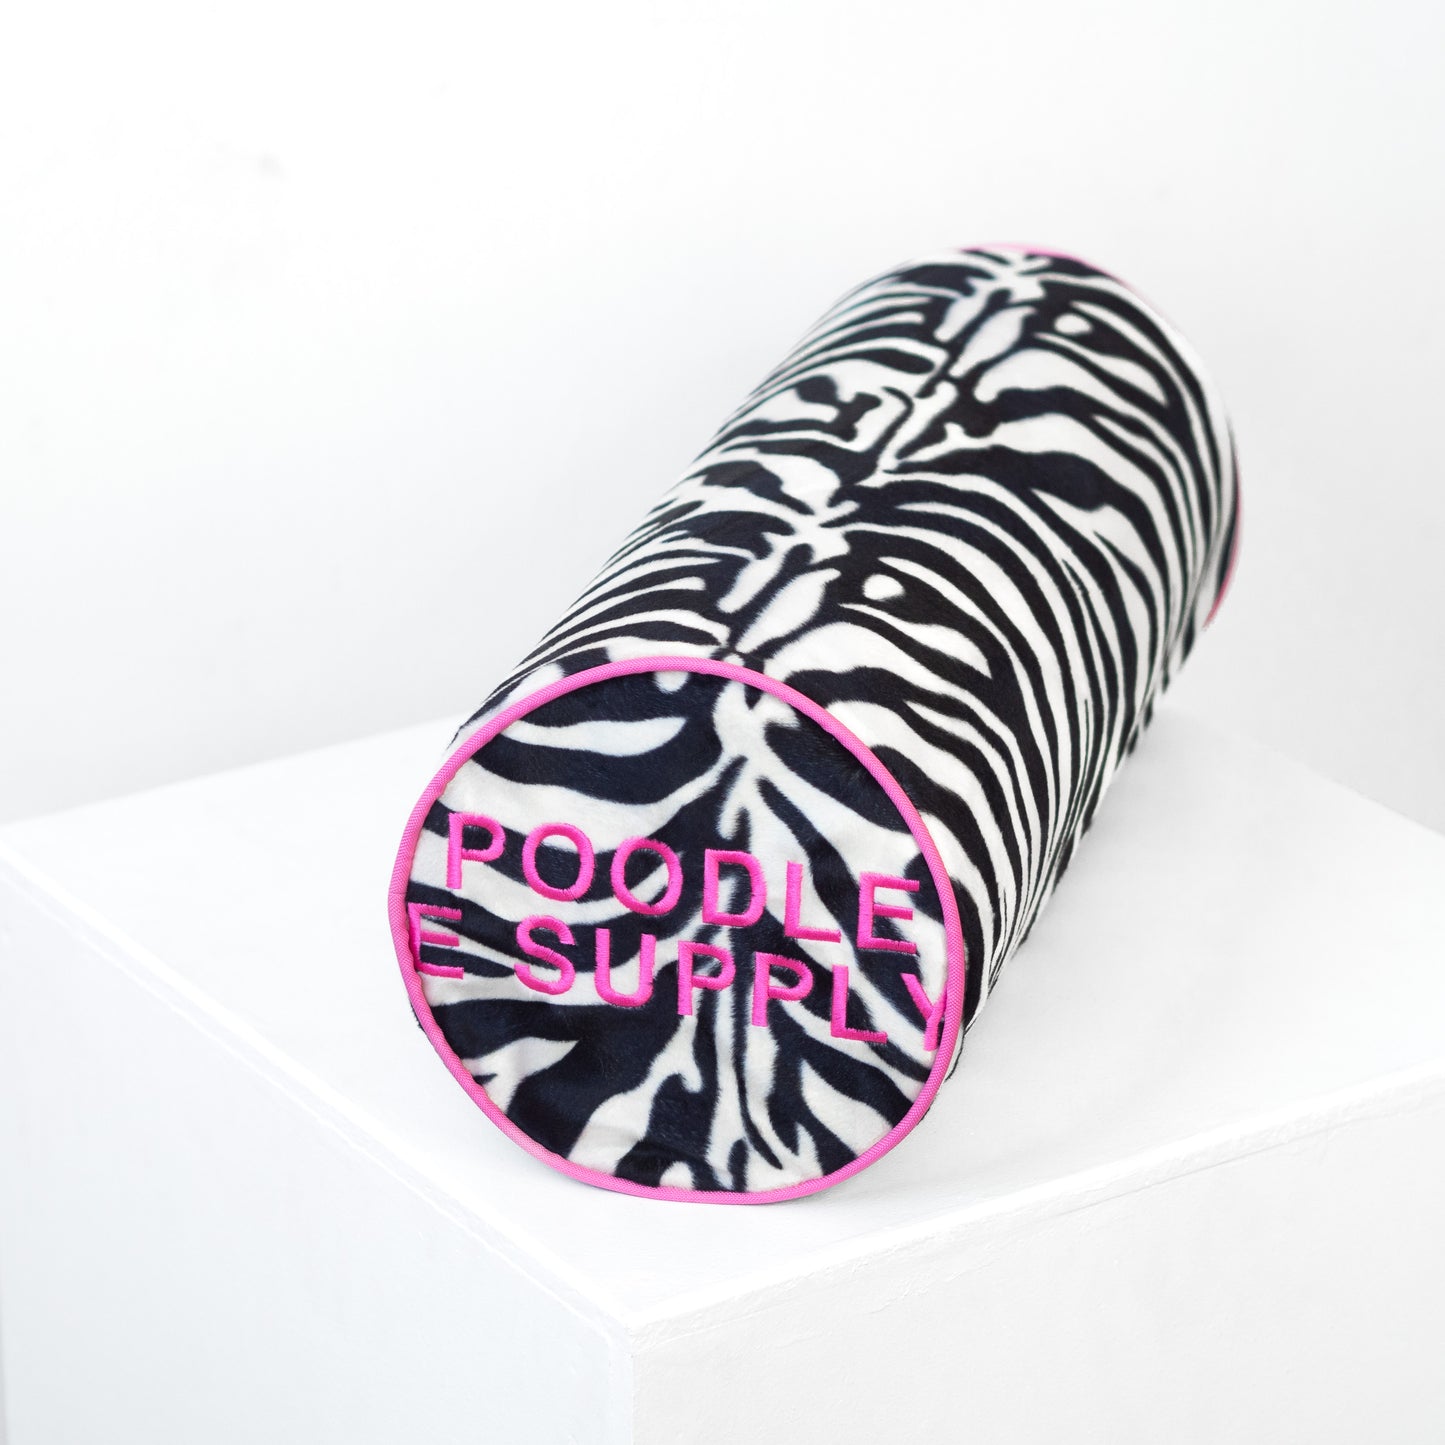 Poodle Supply Top Knot Pillow - Lord Zebra - Large